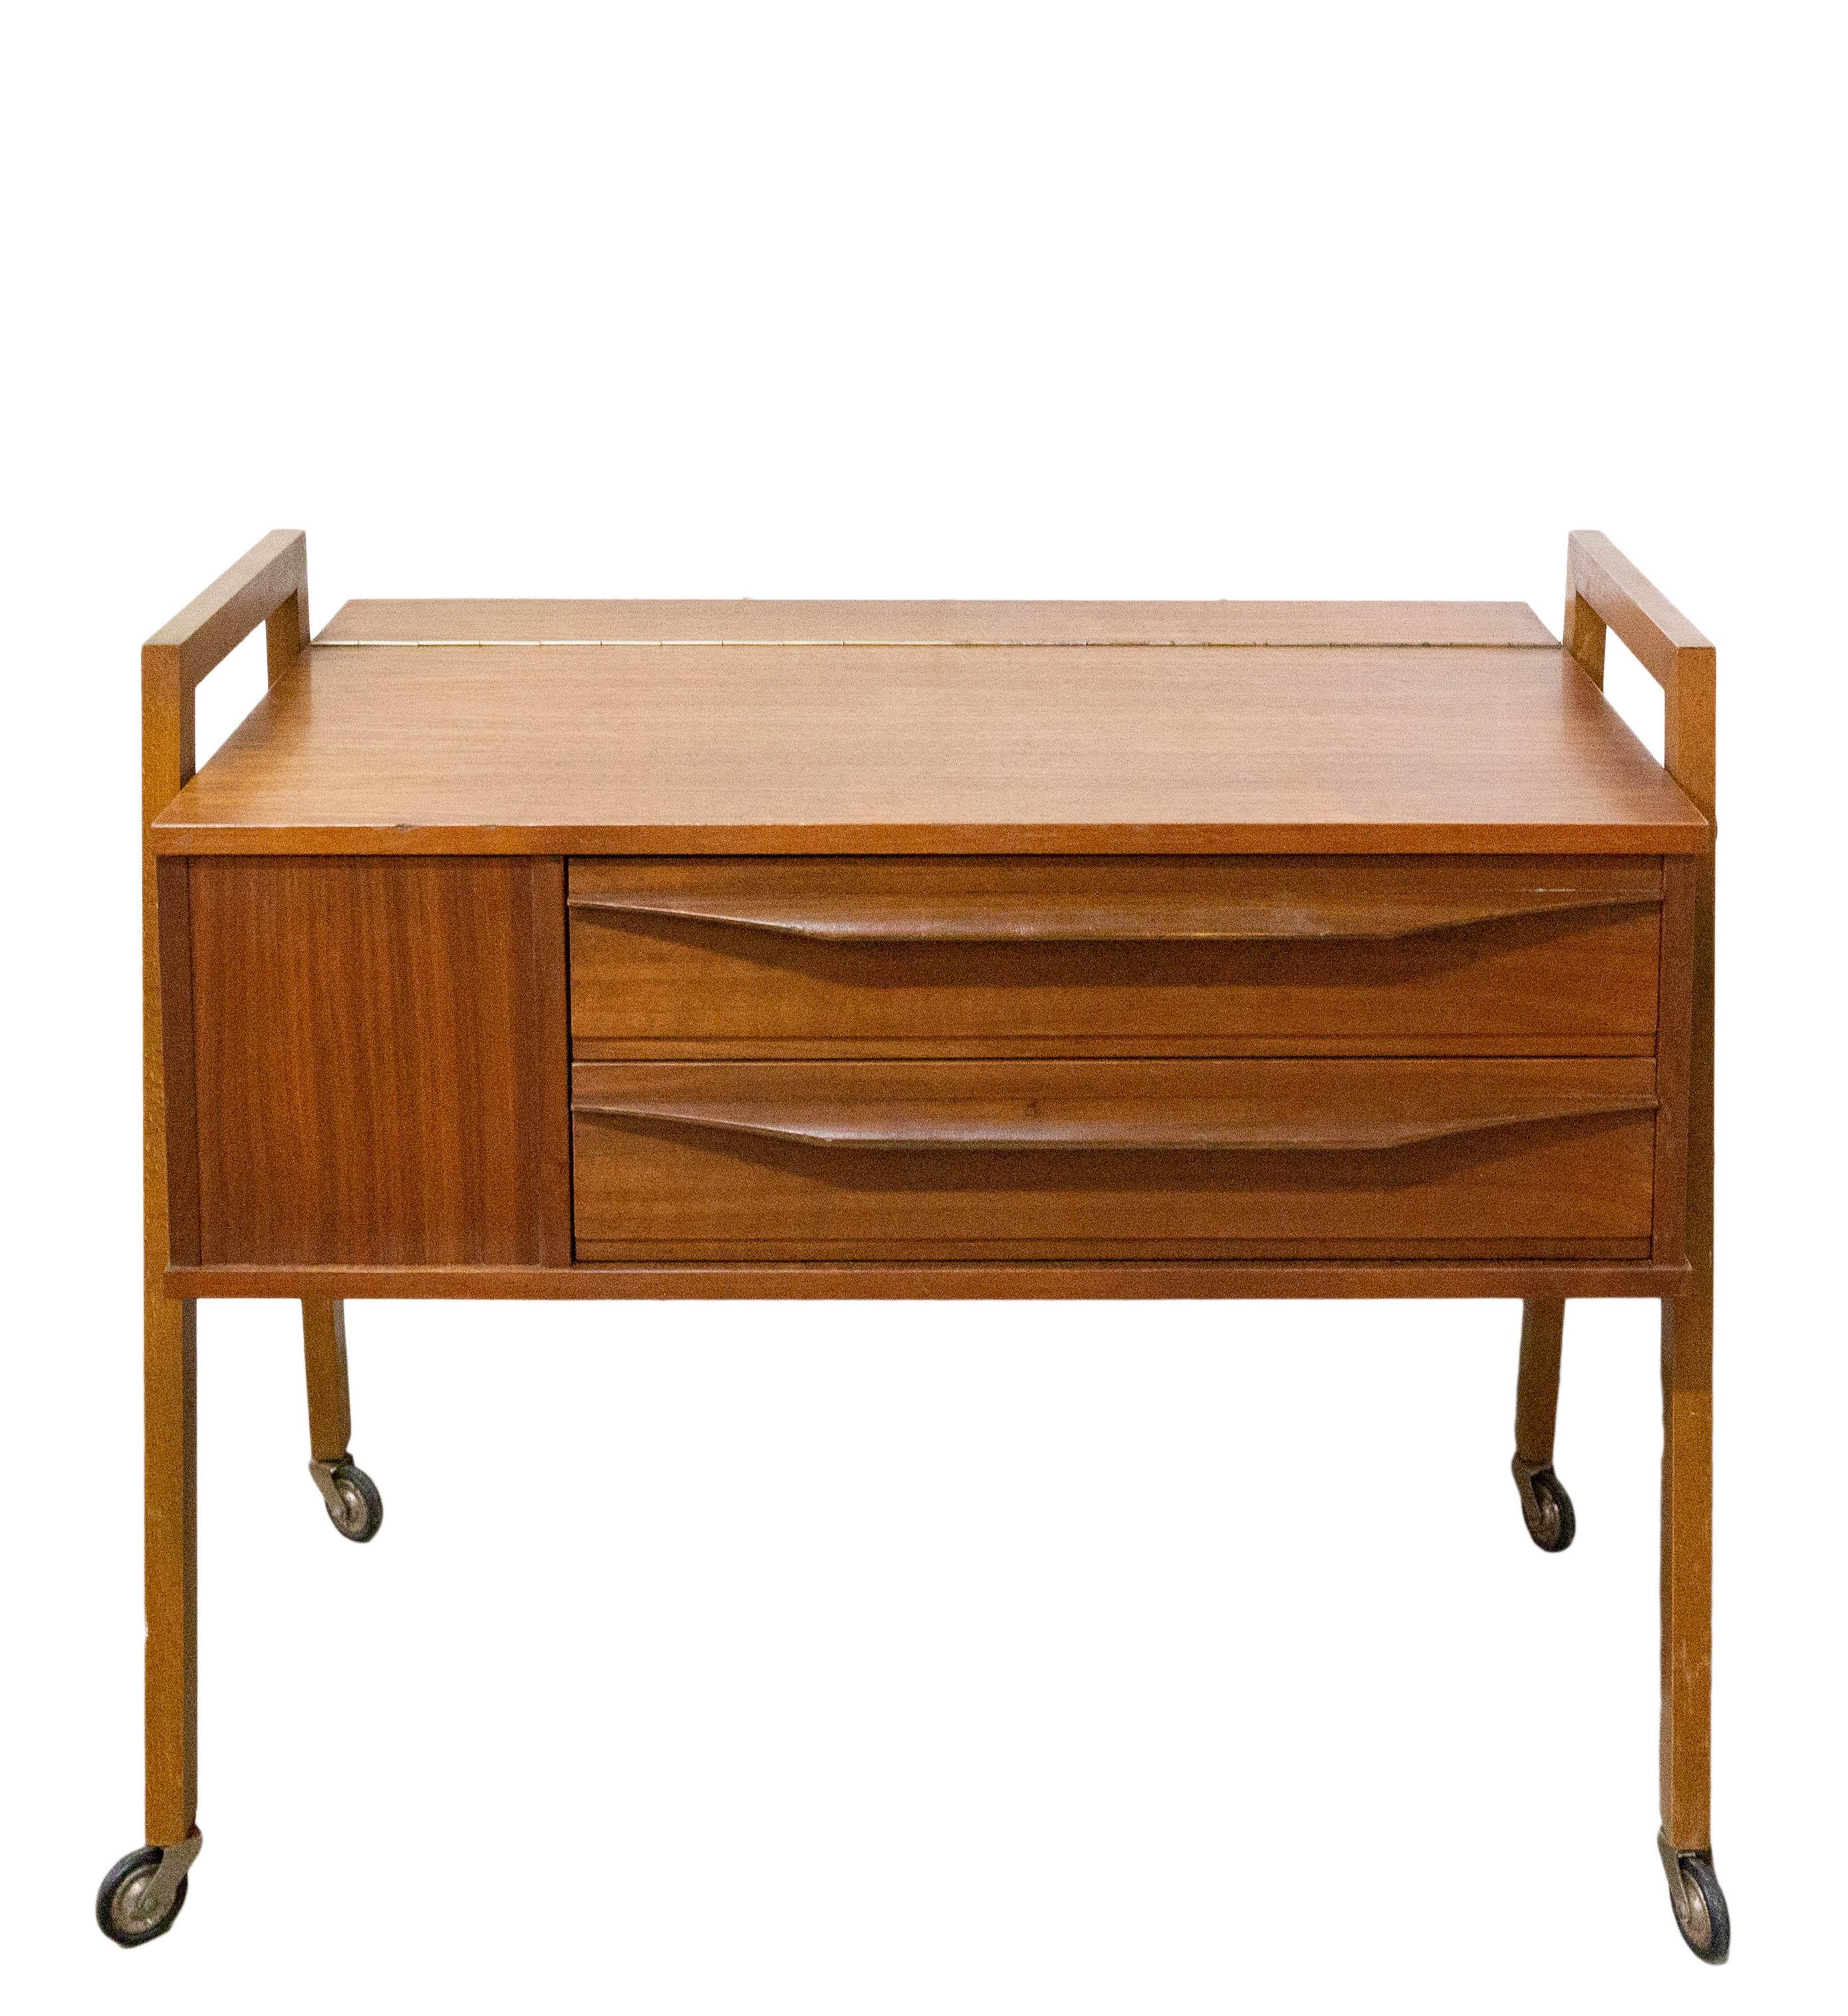 Little wheeled console, French, circa 1960-1970
This furniture was created to store sewing materiel
Very good condition

Shipping:
L 66.5, P 40.50, H 53 cm 11 kg.